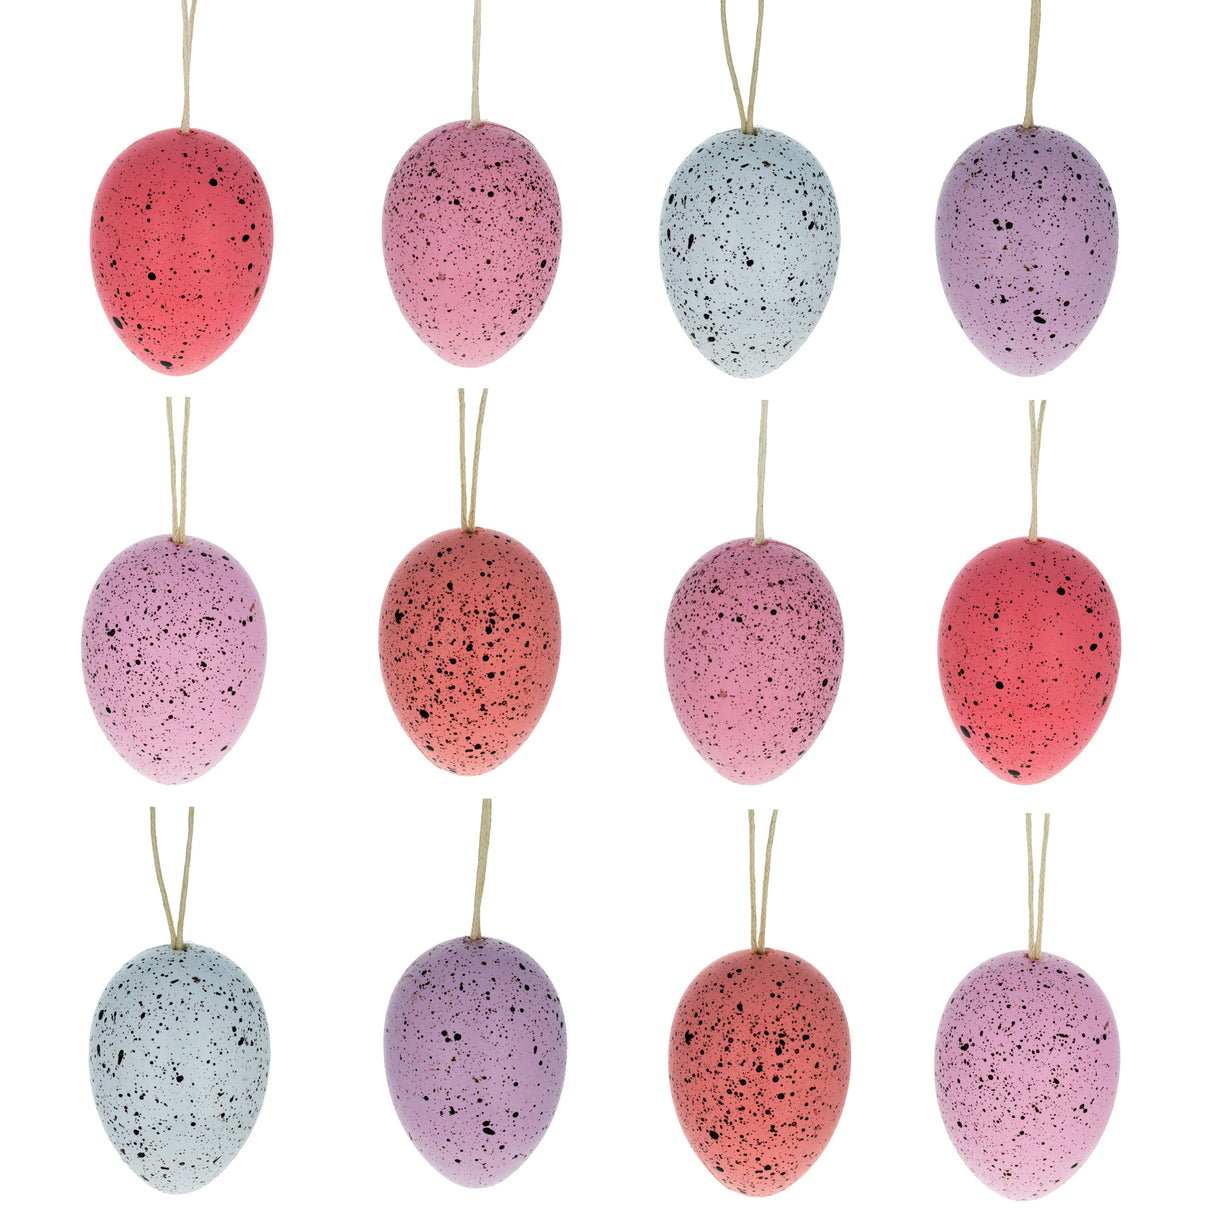 Bag of 12 Pink and White Speckled Plastic Easter Egg Ornaments 2.35 Inches in Pink color, Oval shape